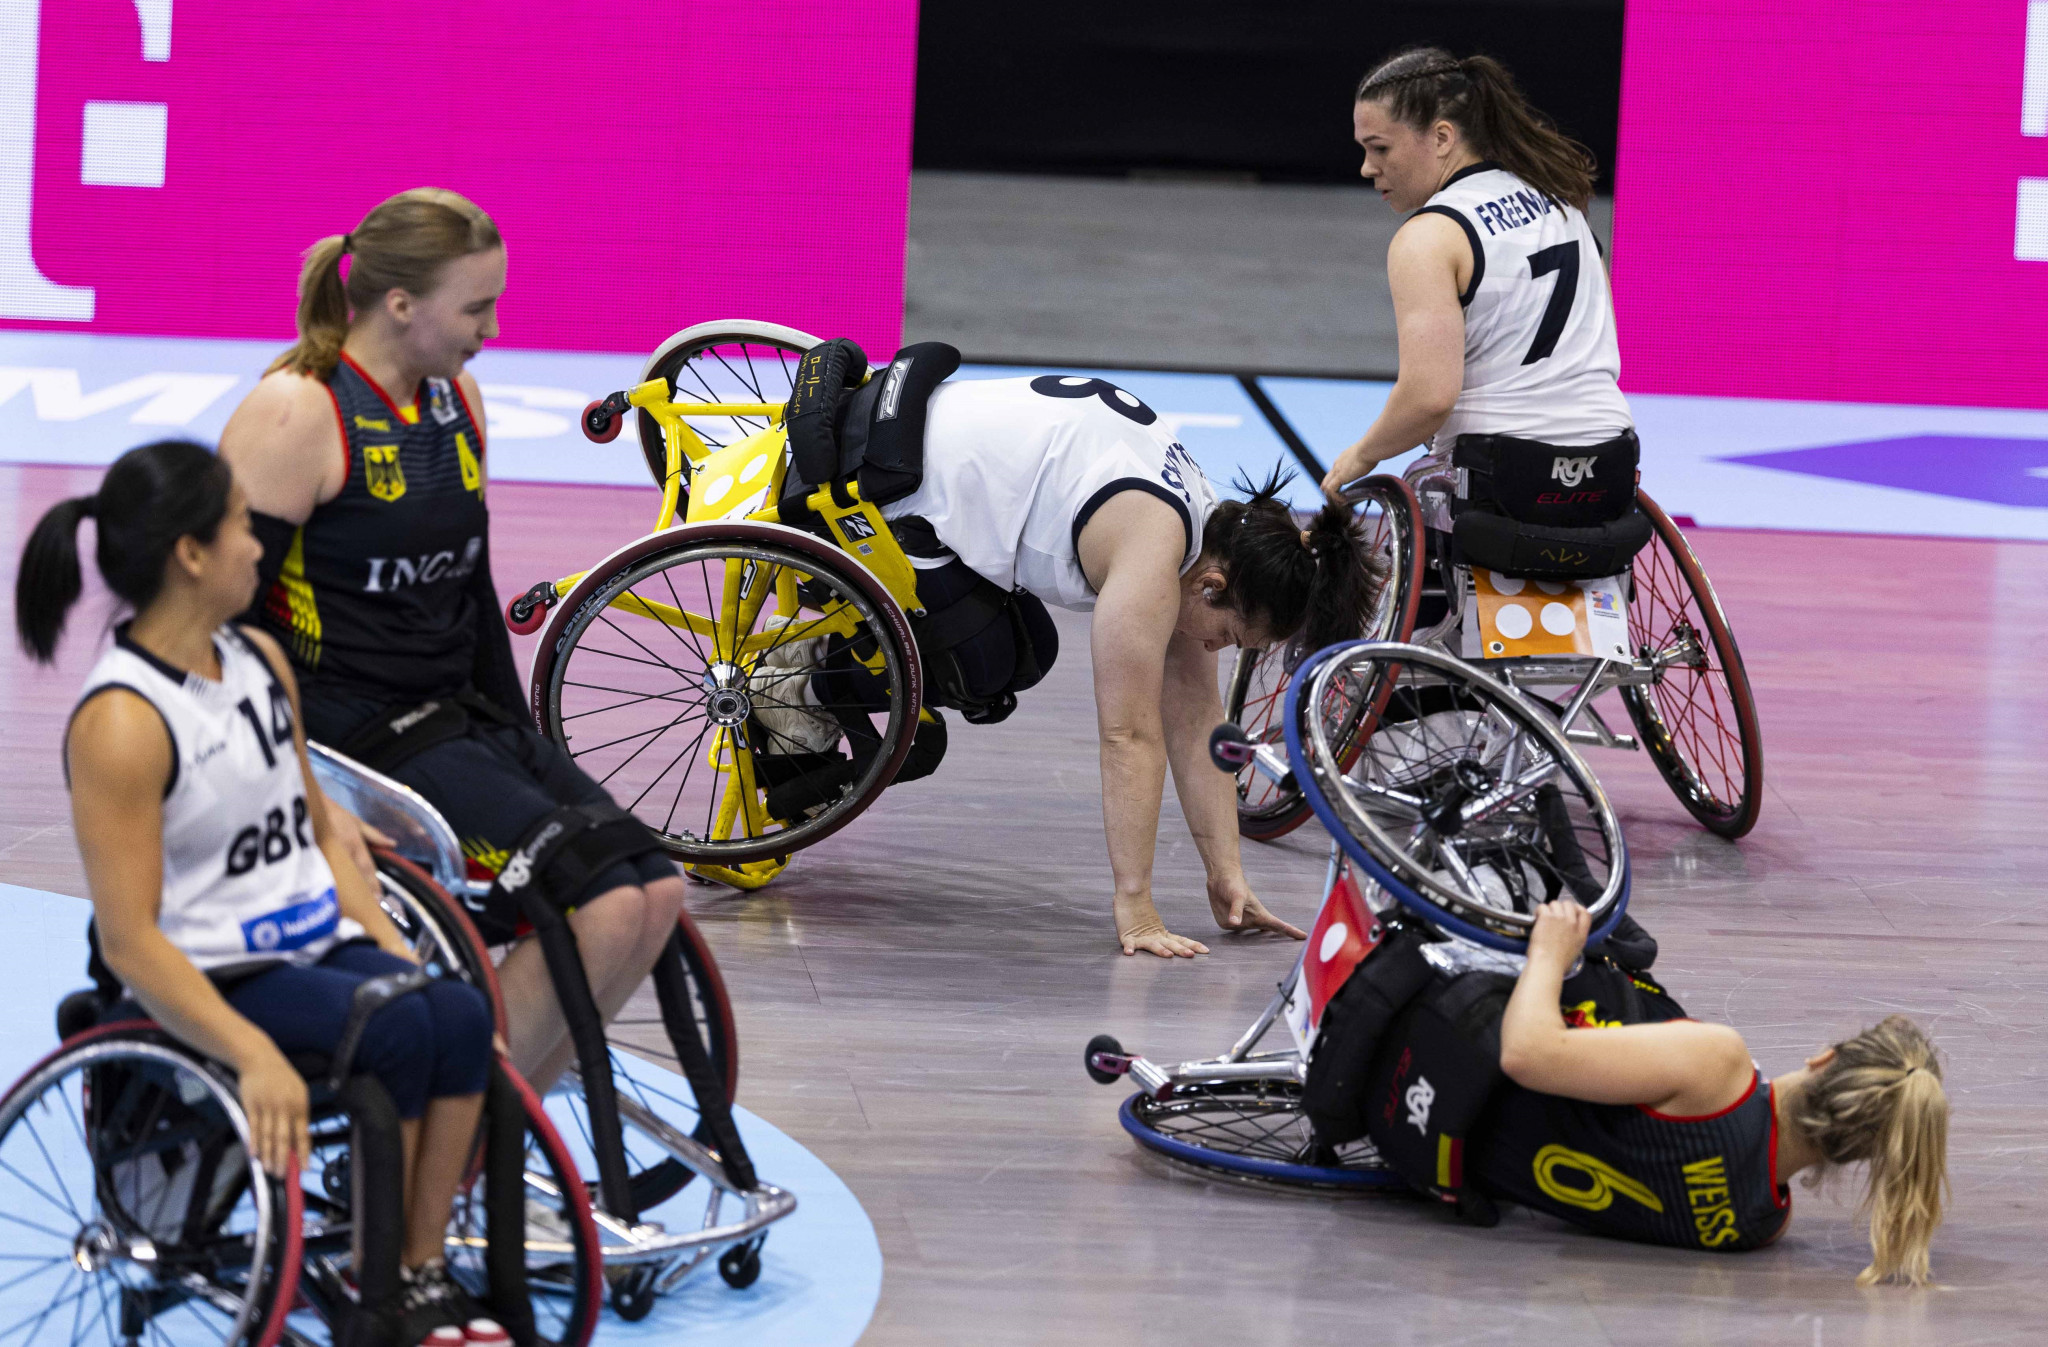 There were plenty of collisions as wheelchair basketball began with a bang at the Rotterdam Ahoy ©EPC